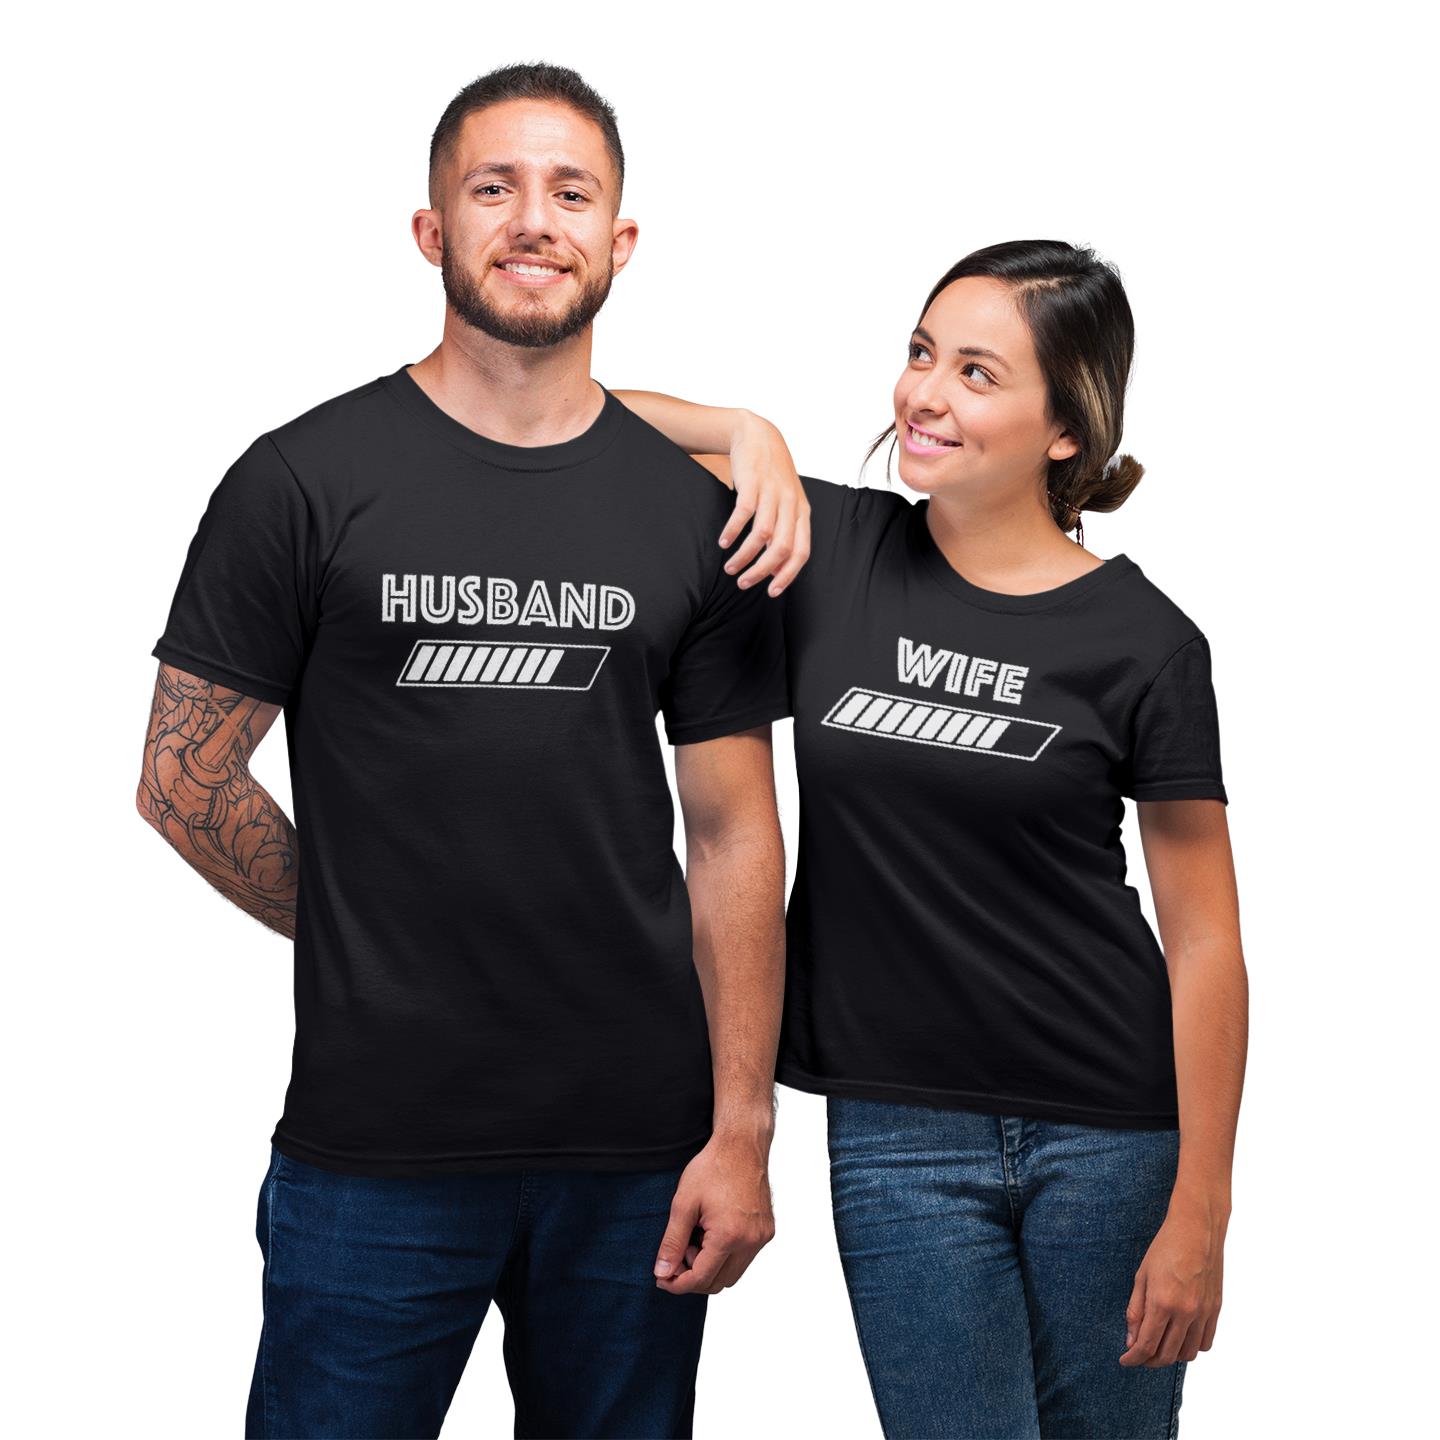 Husband Wife Shirt For Couple Matching His And Hers T-shirt